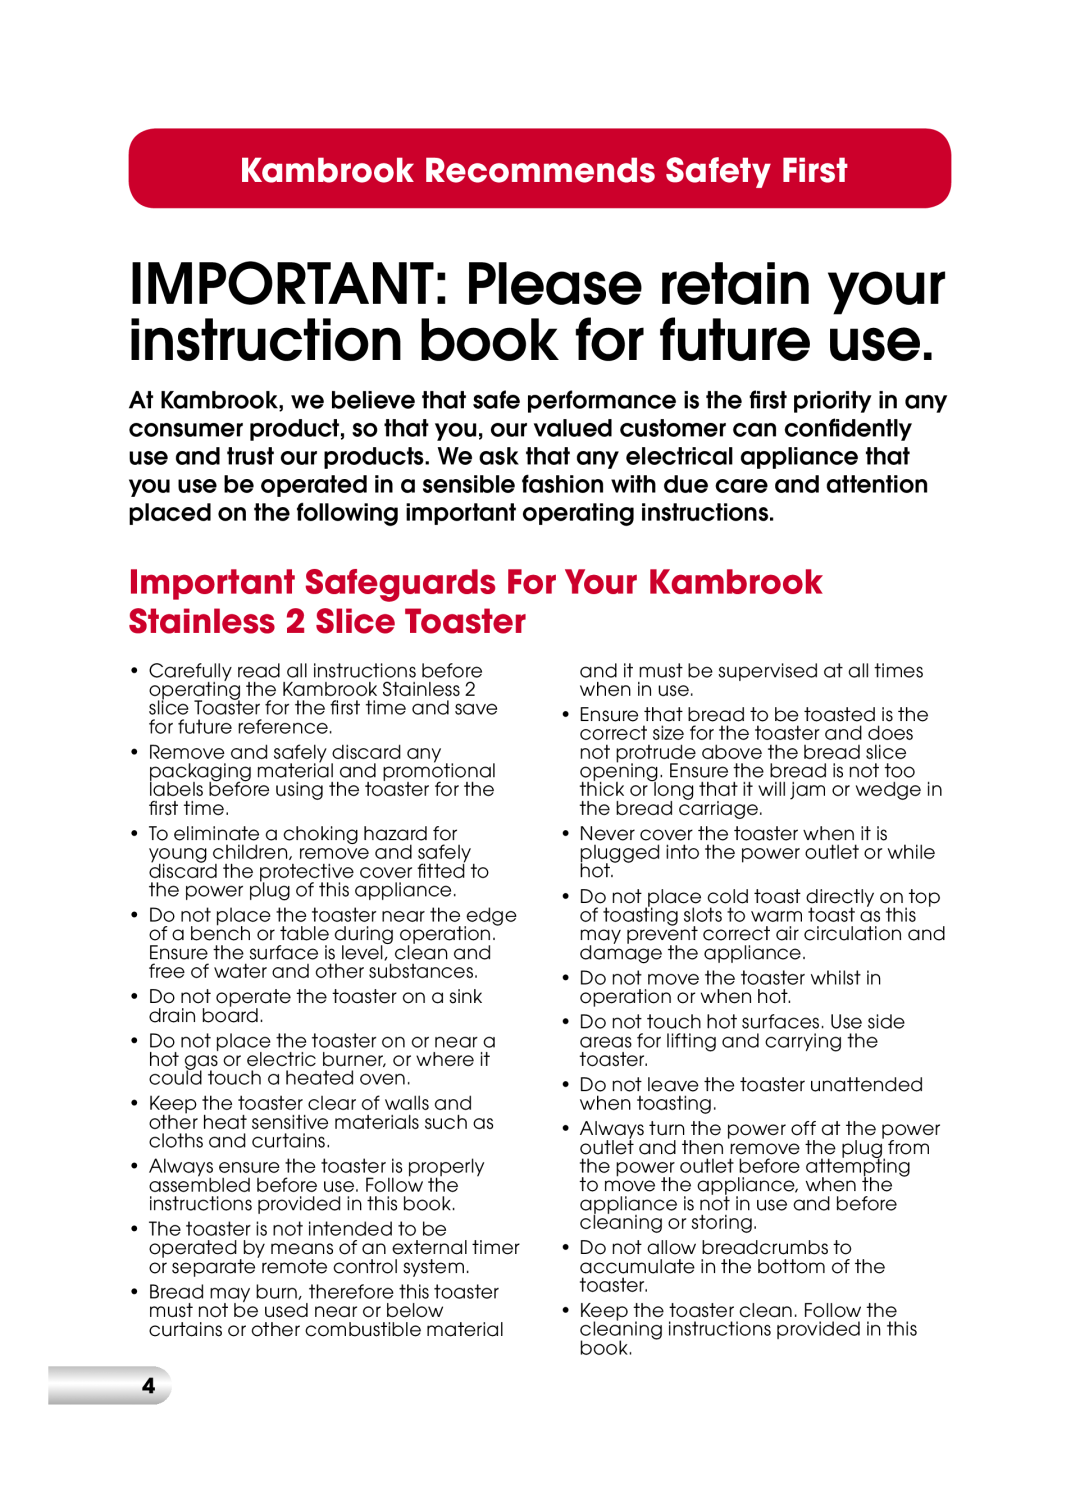 Kambrook KT110 manual Kambrook Recommends Safety First 